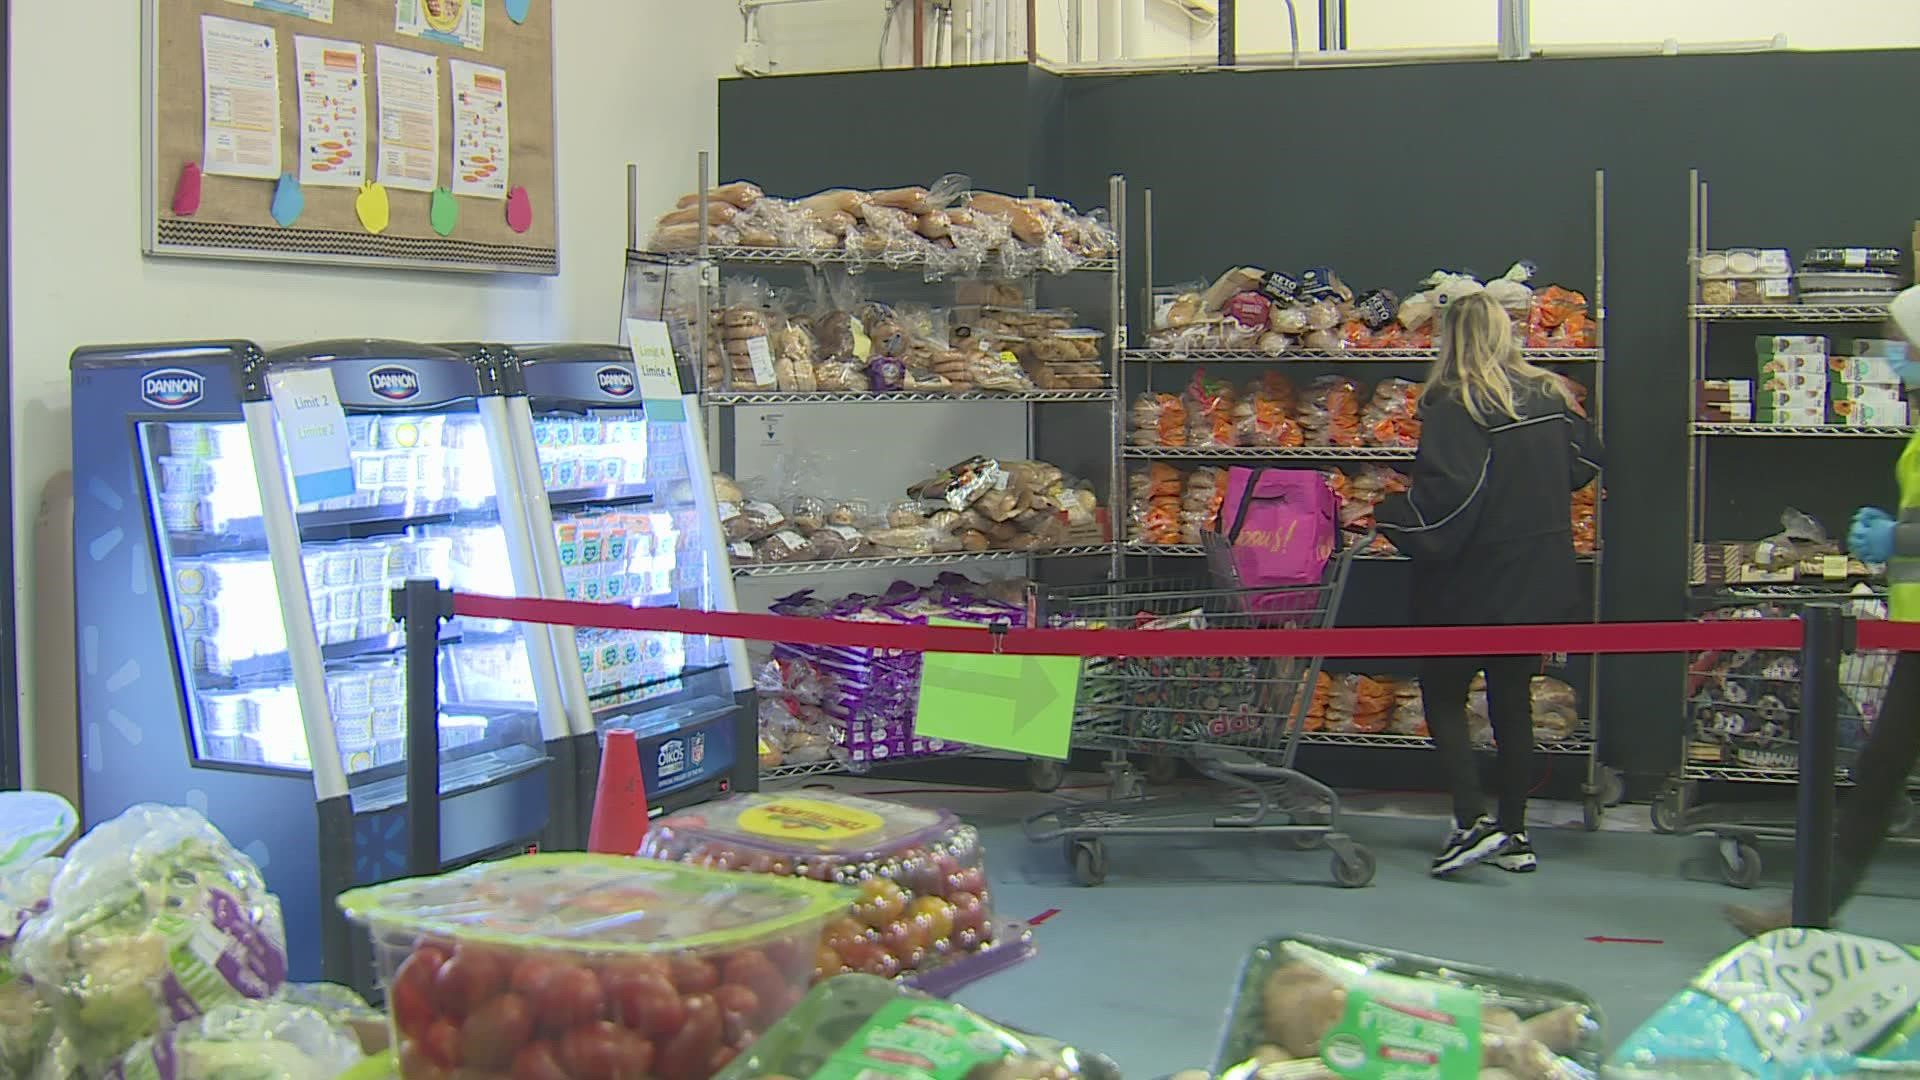 Inflation has hit hard in Colorado and food banks are feeling it too. It's impacting the price of food and the cost of distributing that food to people in need.